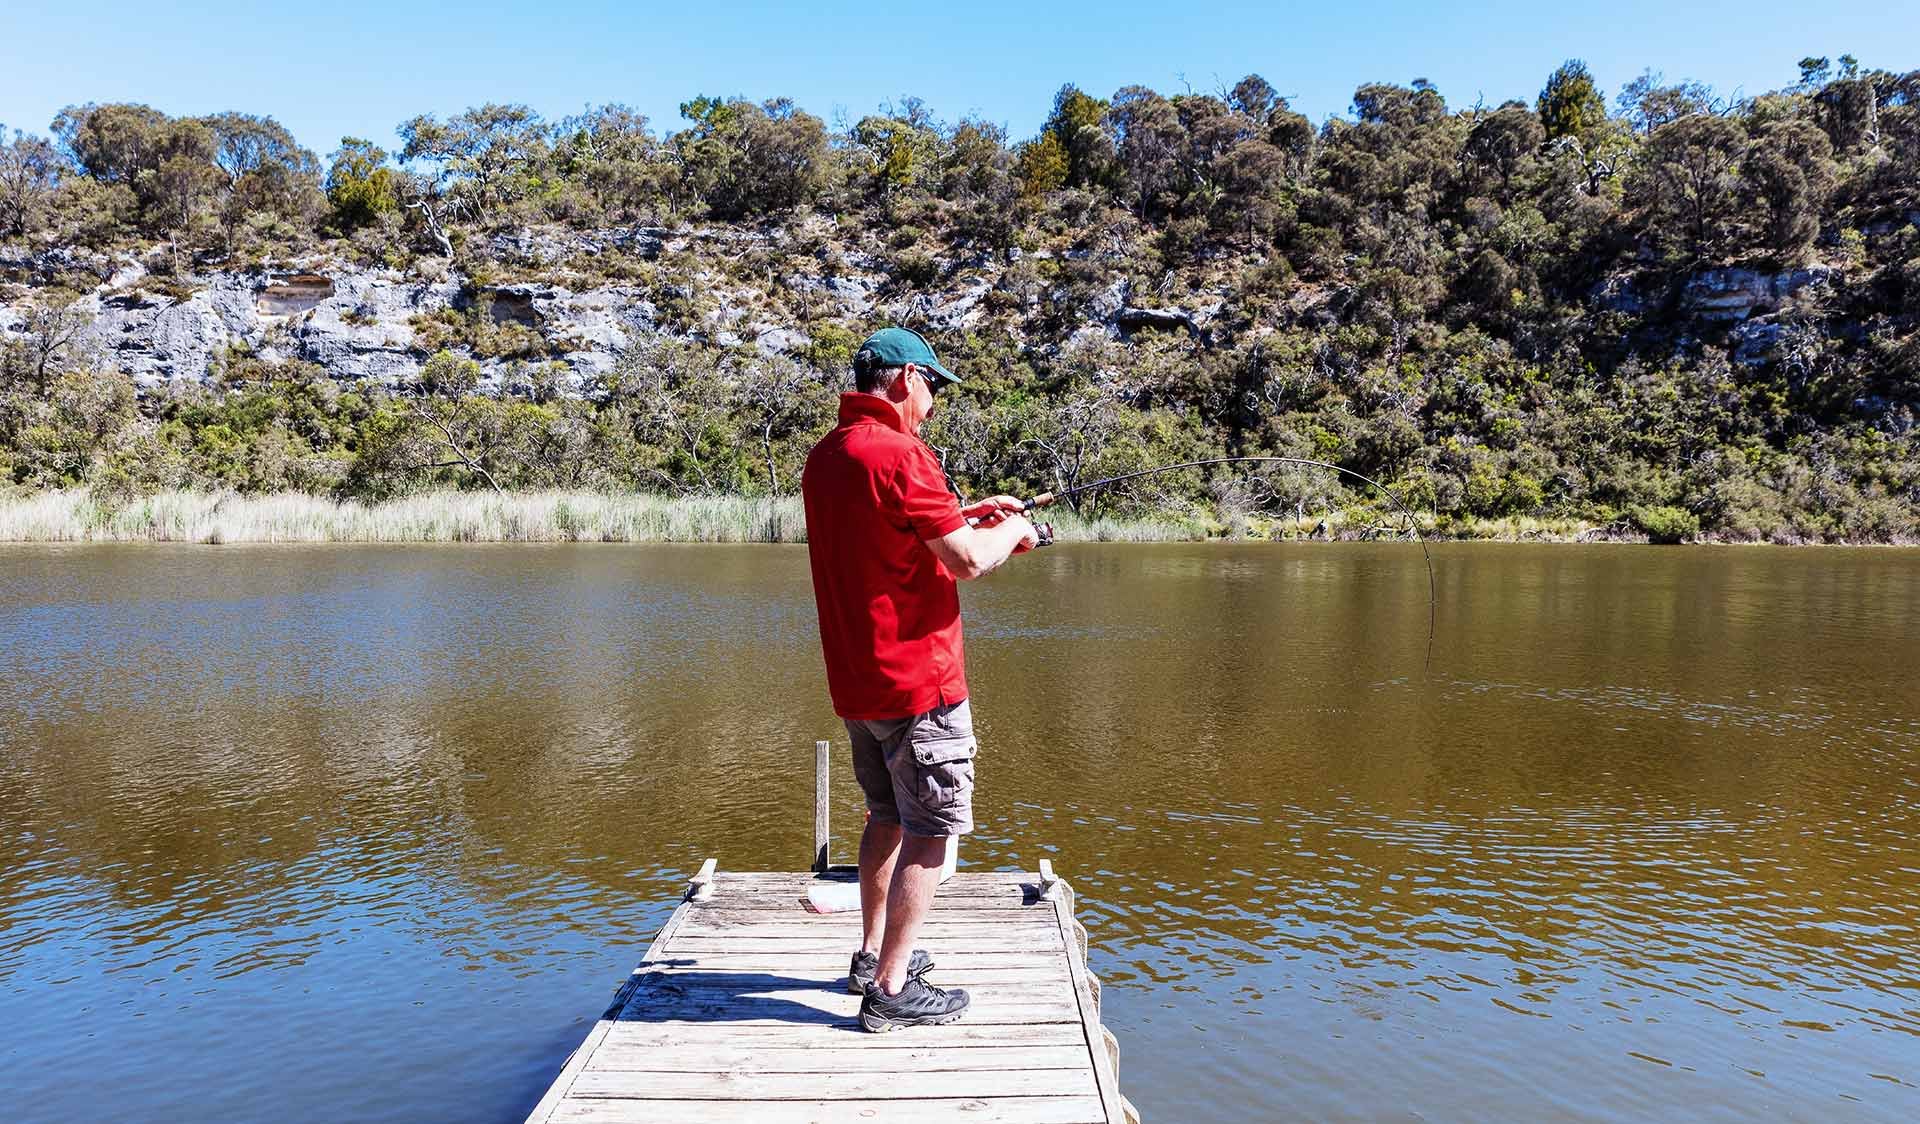 A man fishes from a jetty in the Glenelg River.